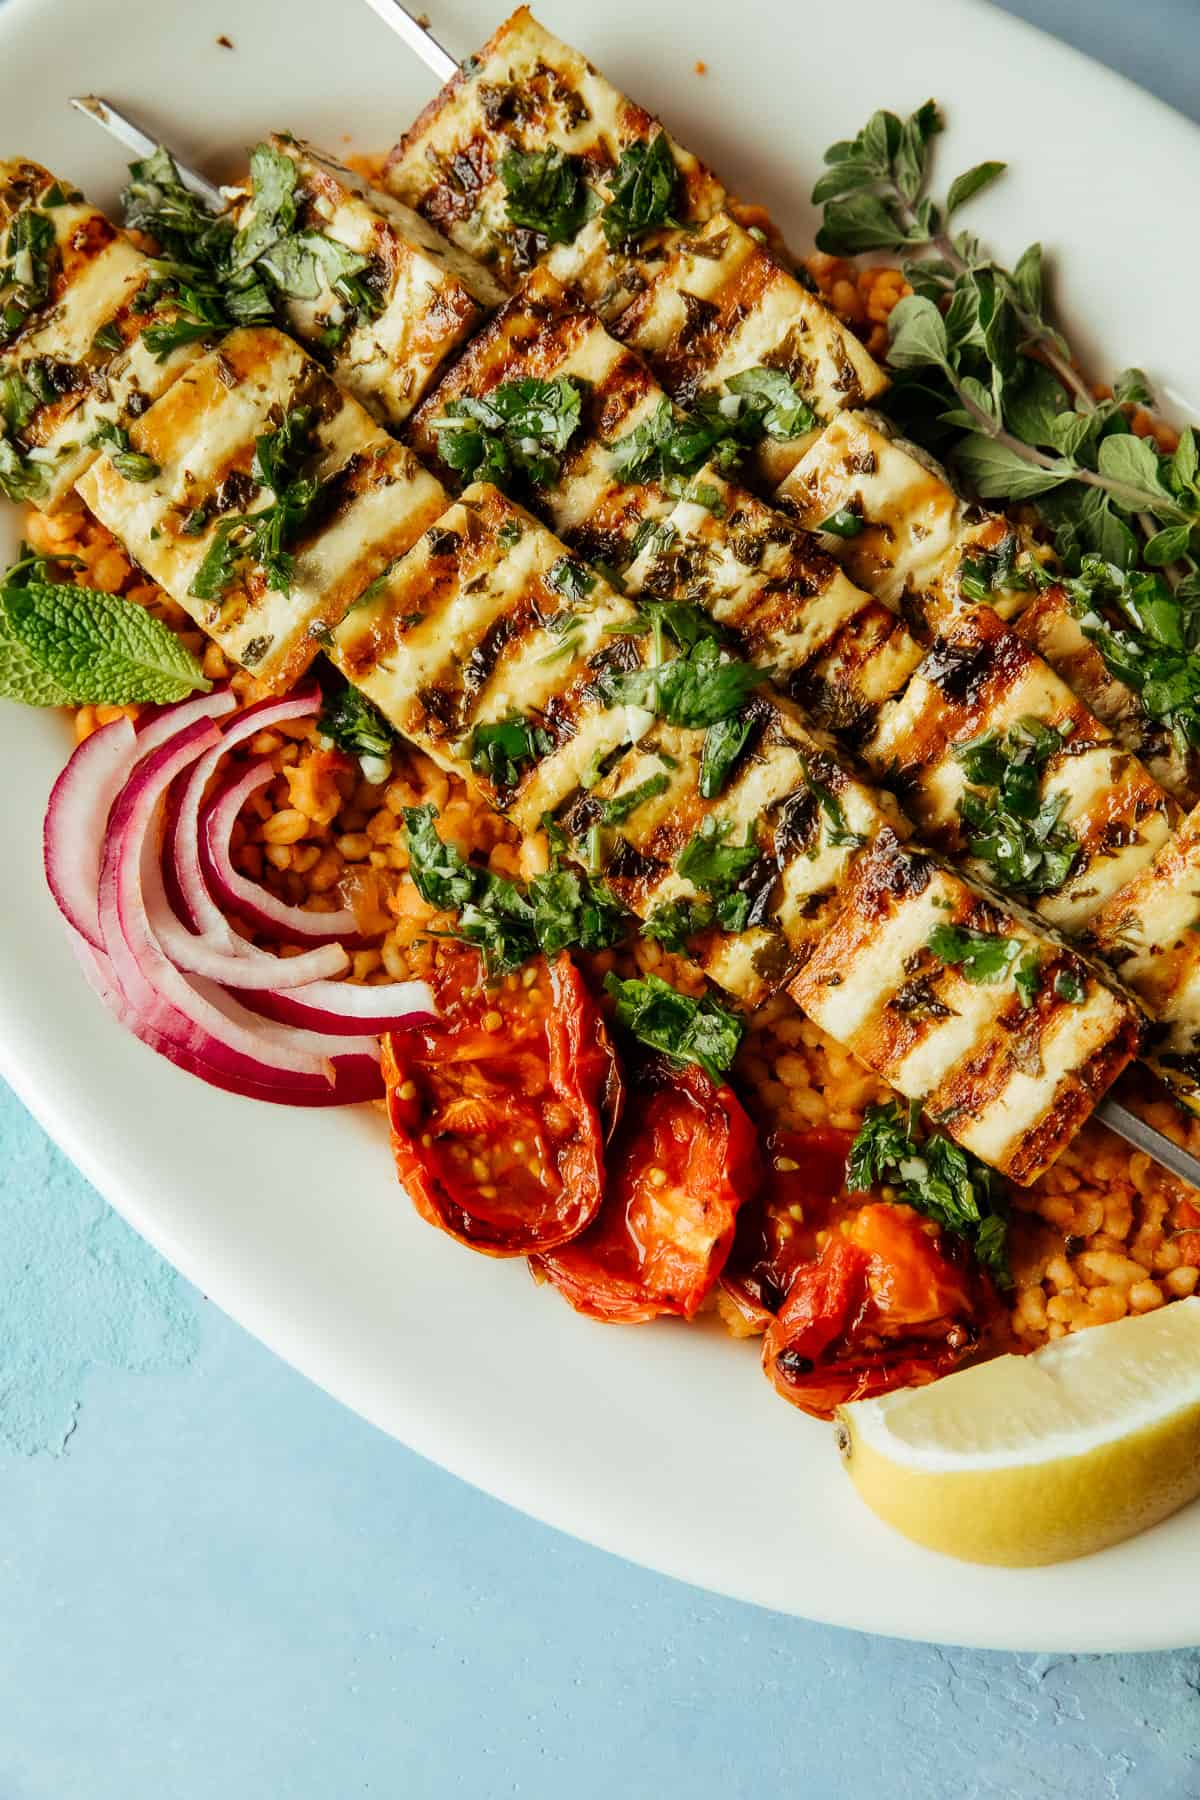 Grilled Tofu with Chimichurri on a bed of bulgur pilaf